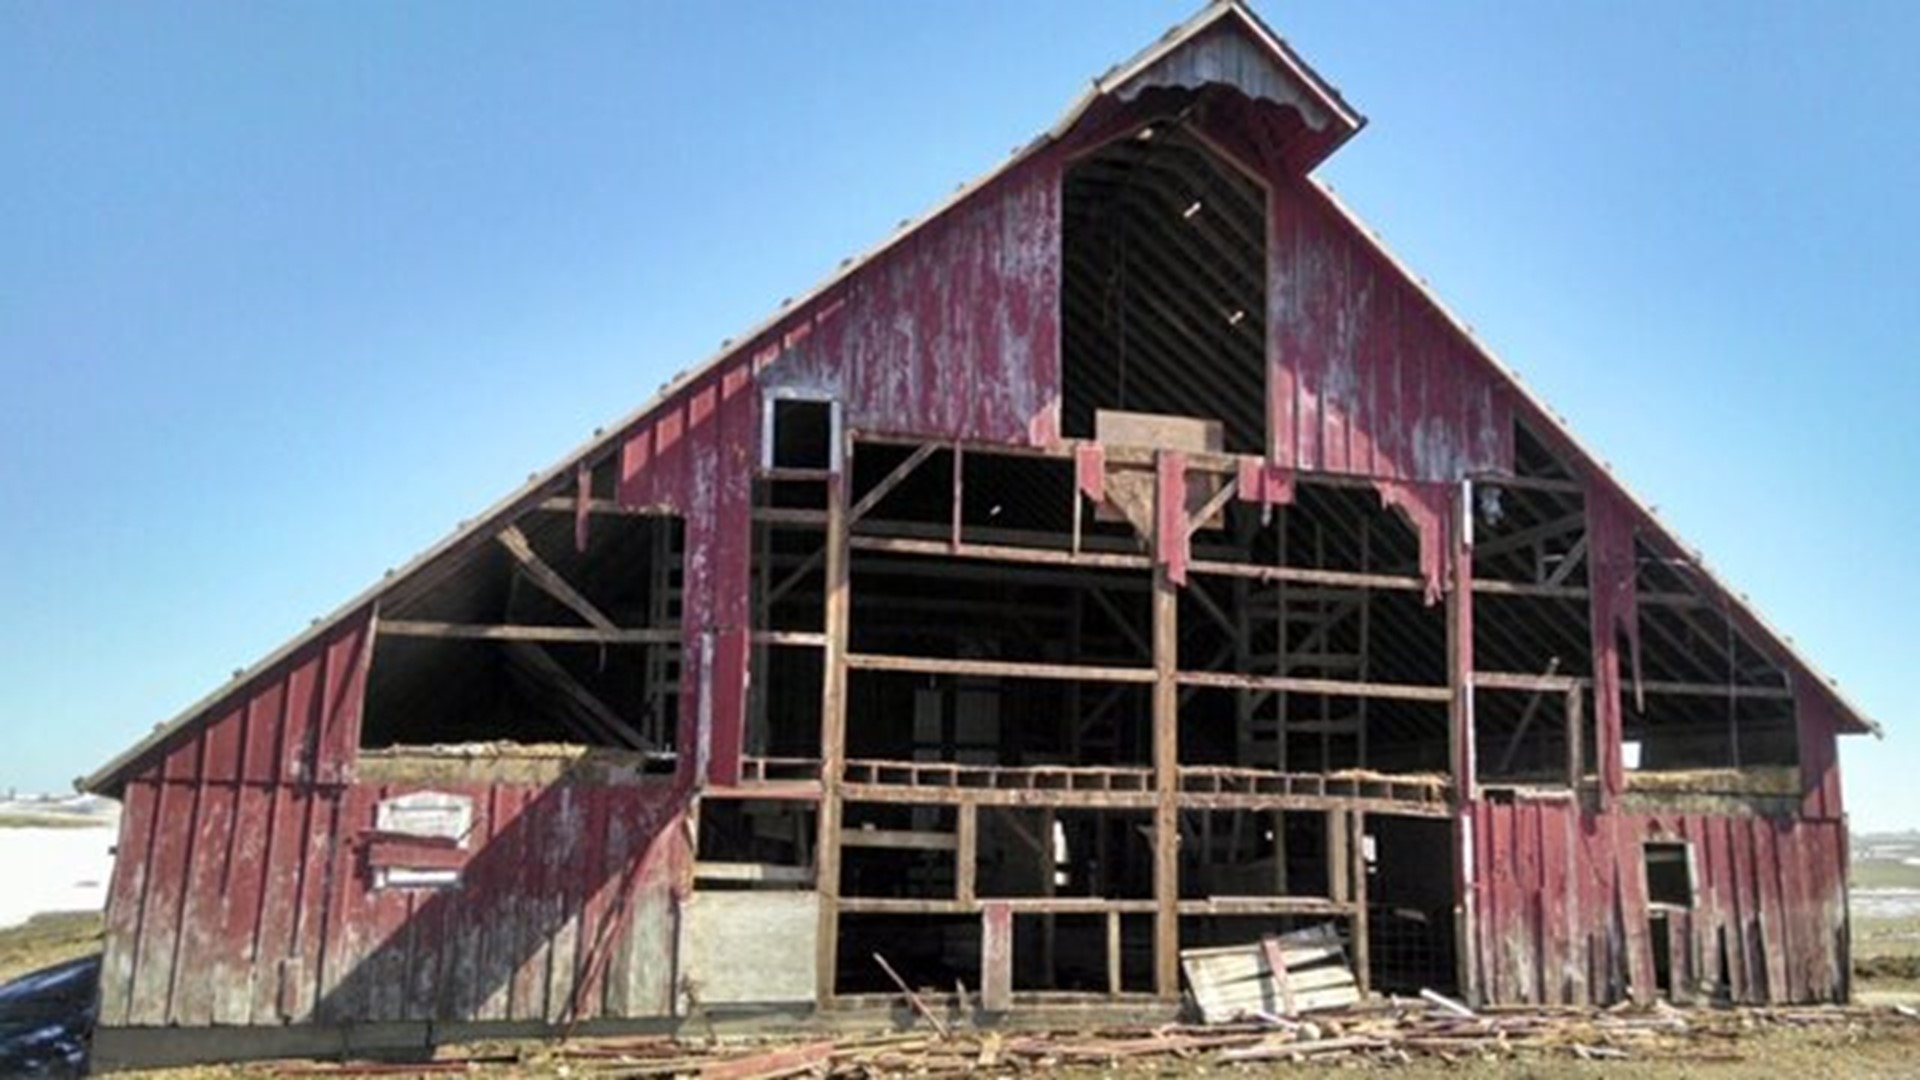 Family barn stolen....piece by piece